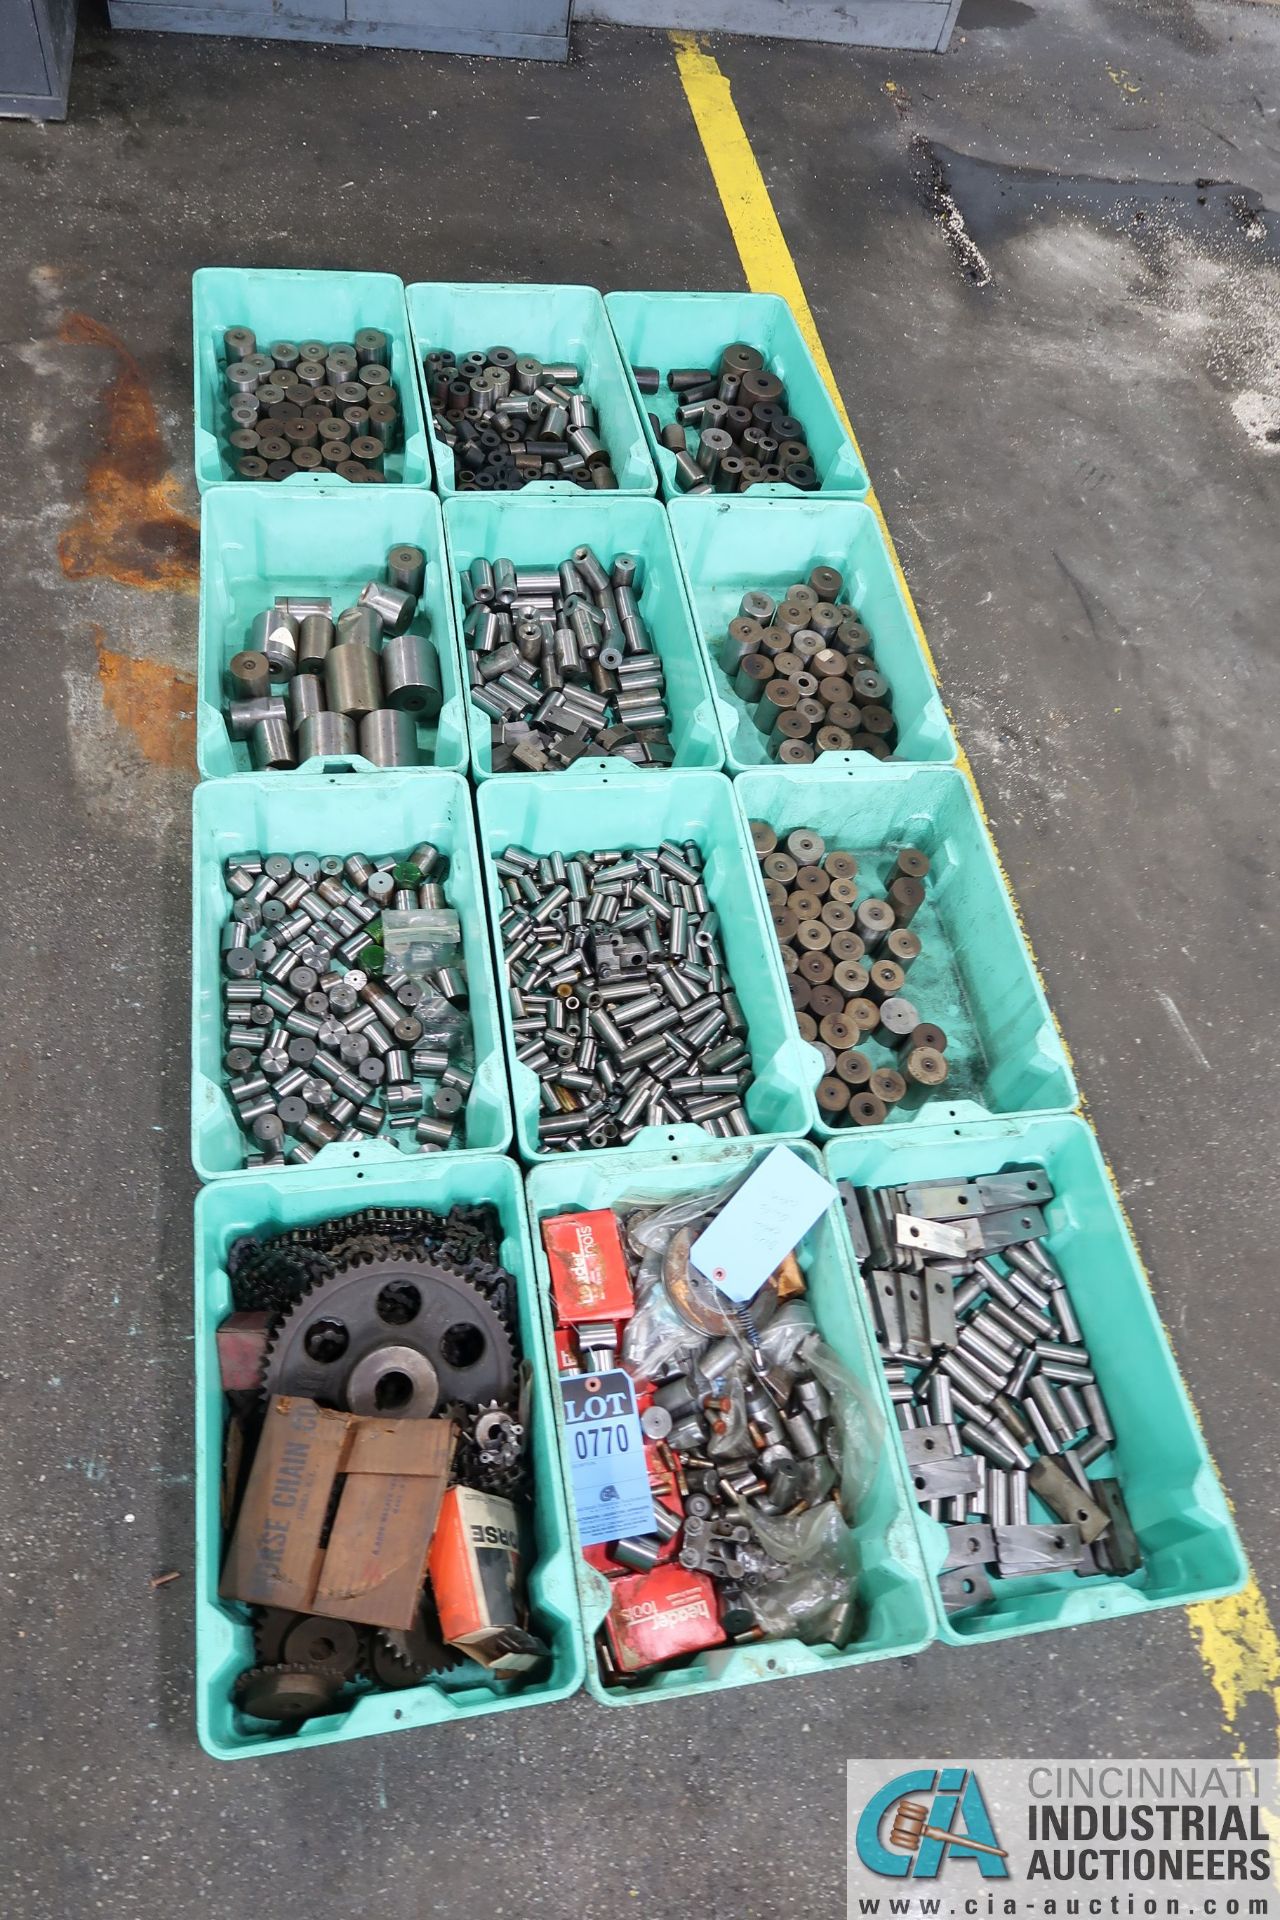 (LOT) ASSORTED COLD HEADING TOOLING IN 12 GREEN TOTES - DIES, CASINGS, QUIL, CUTTER AND OTHER